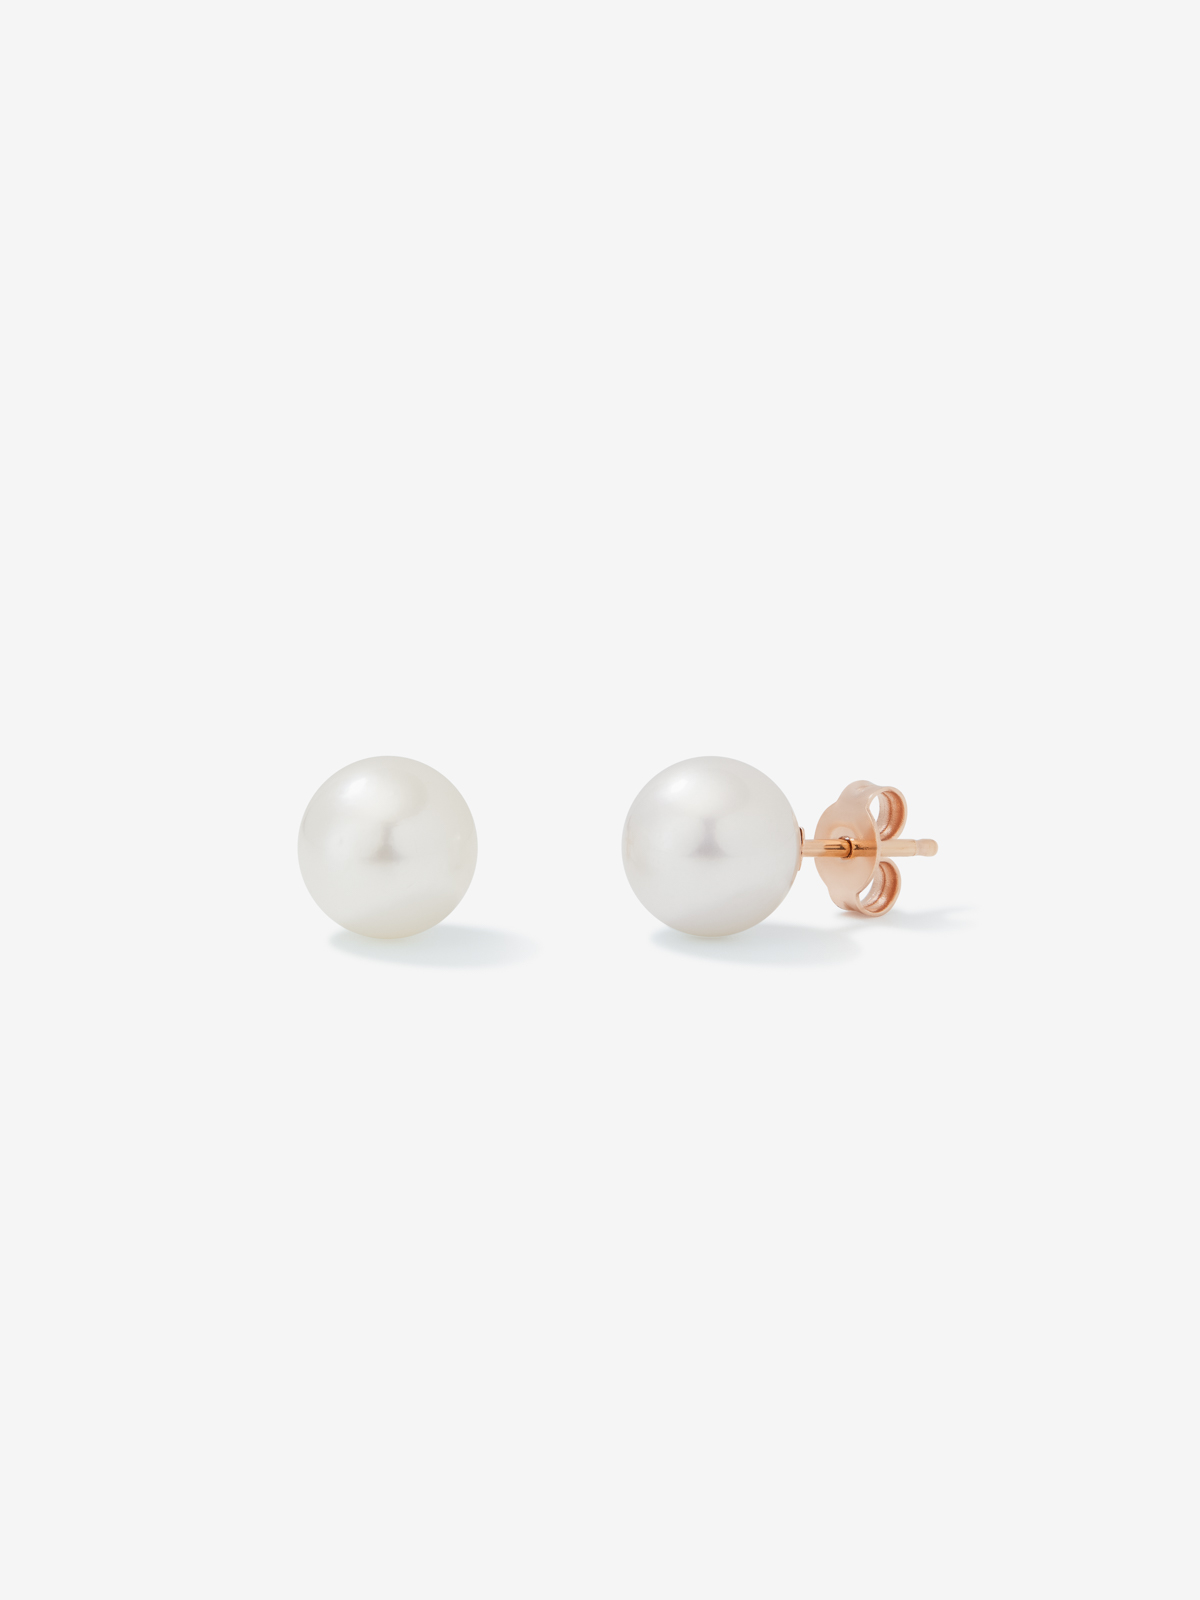 18k rose gold button earring with 9.5mm Australian pearl.